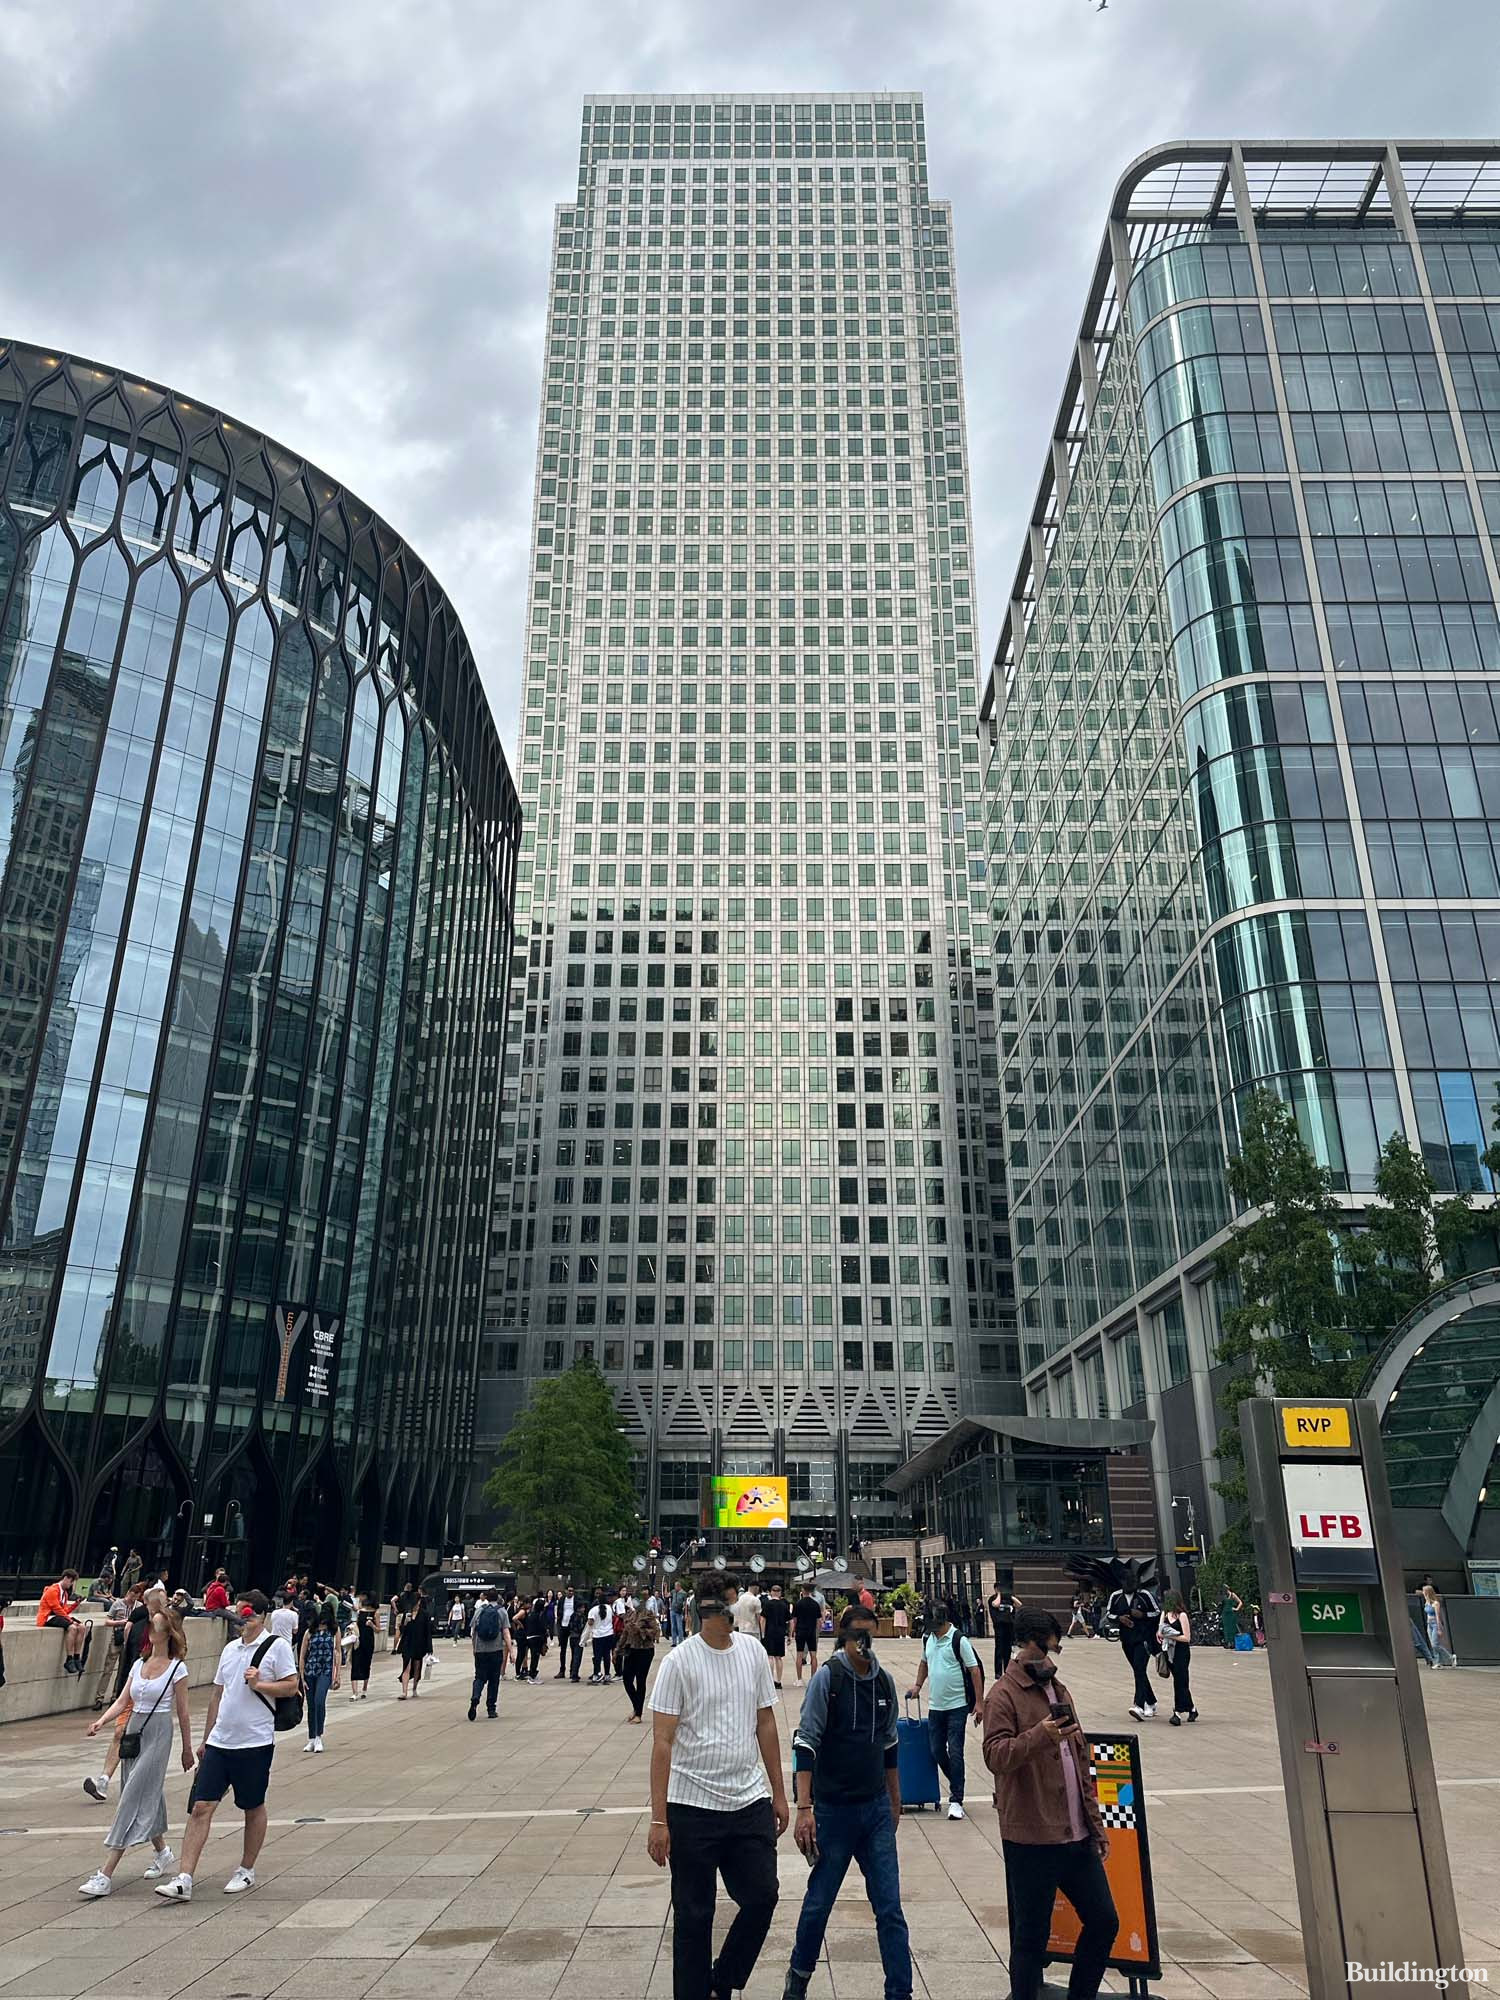 One Canada Square building designed by Pelli Clarke Pelli archtiects.